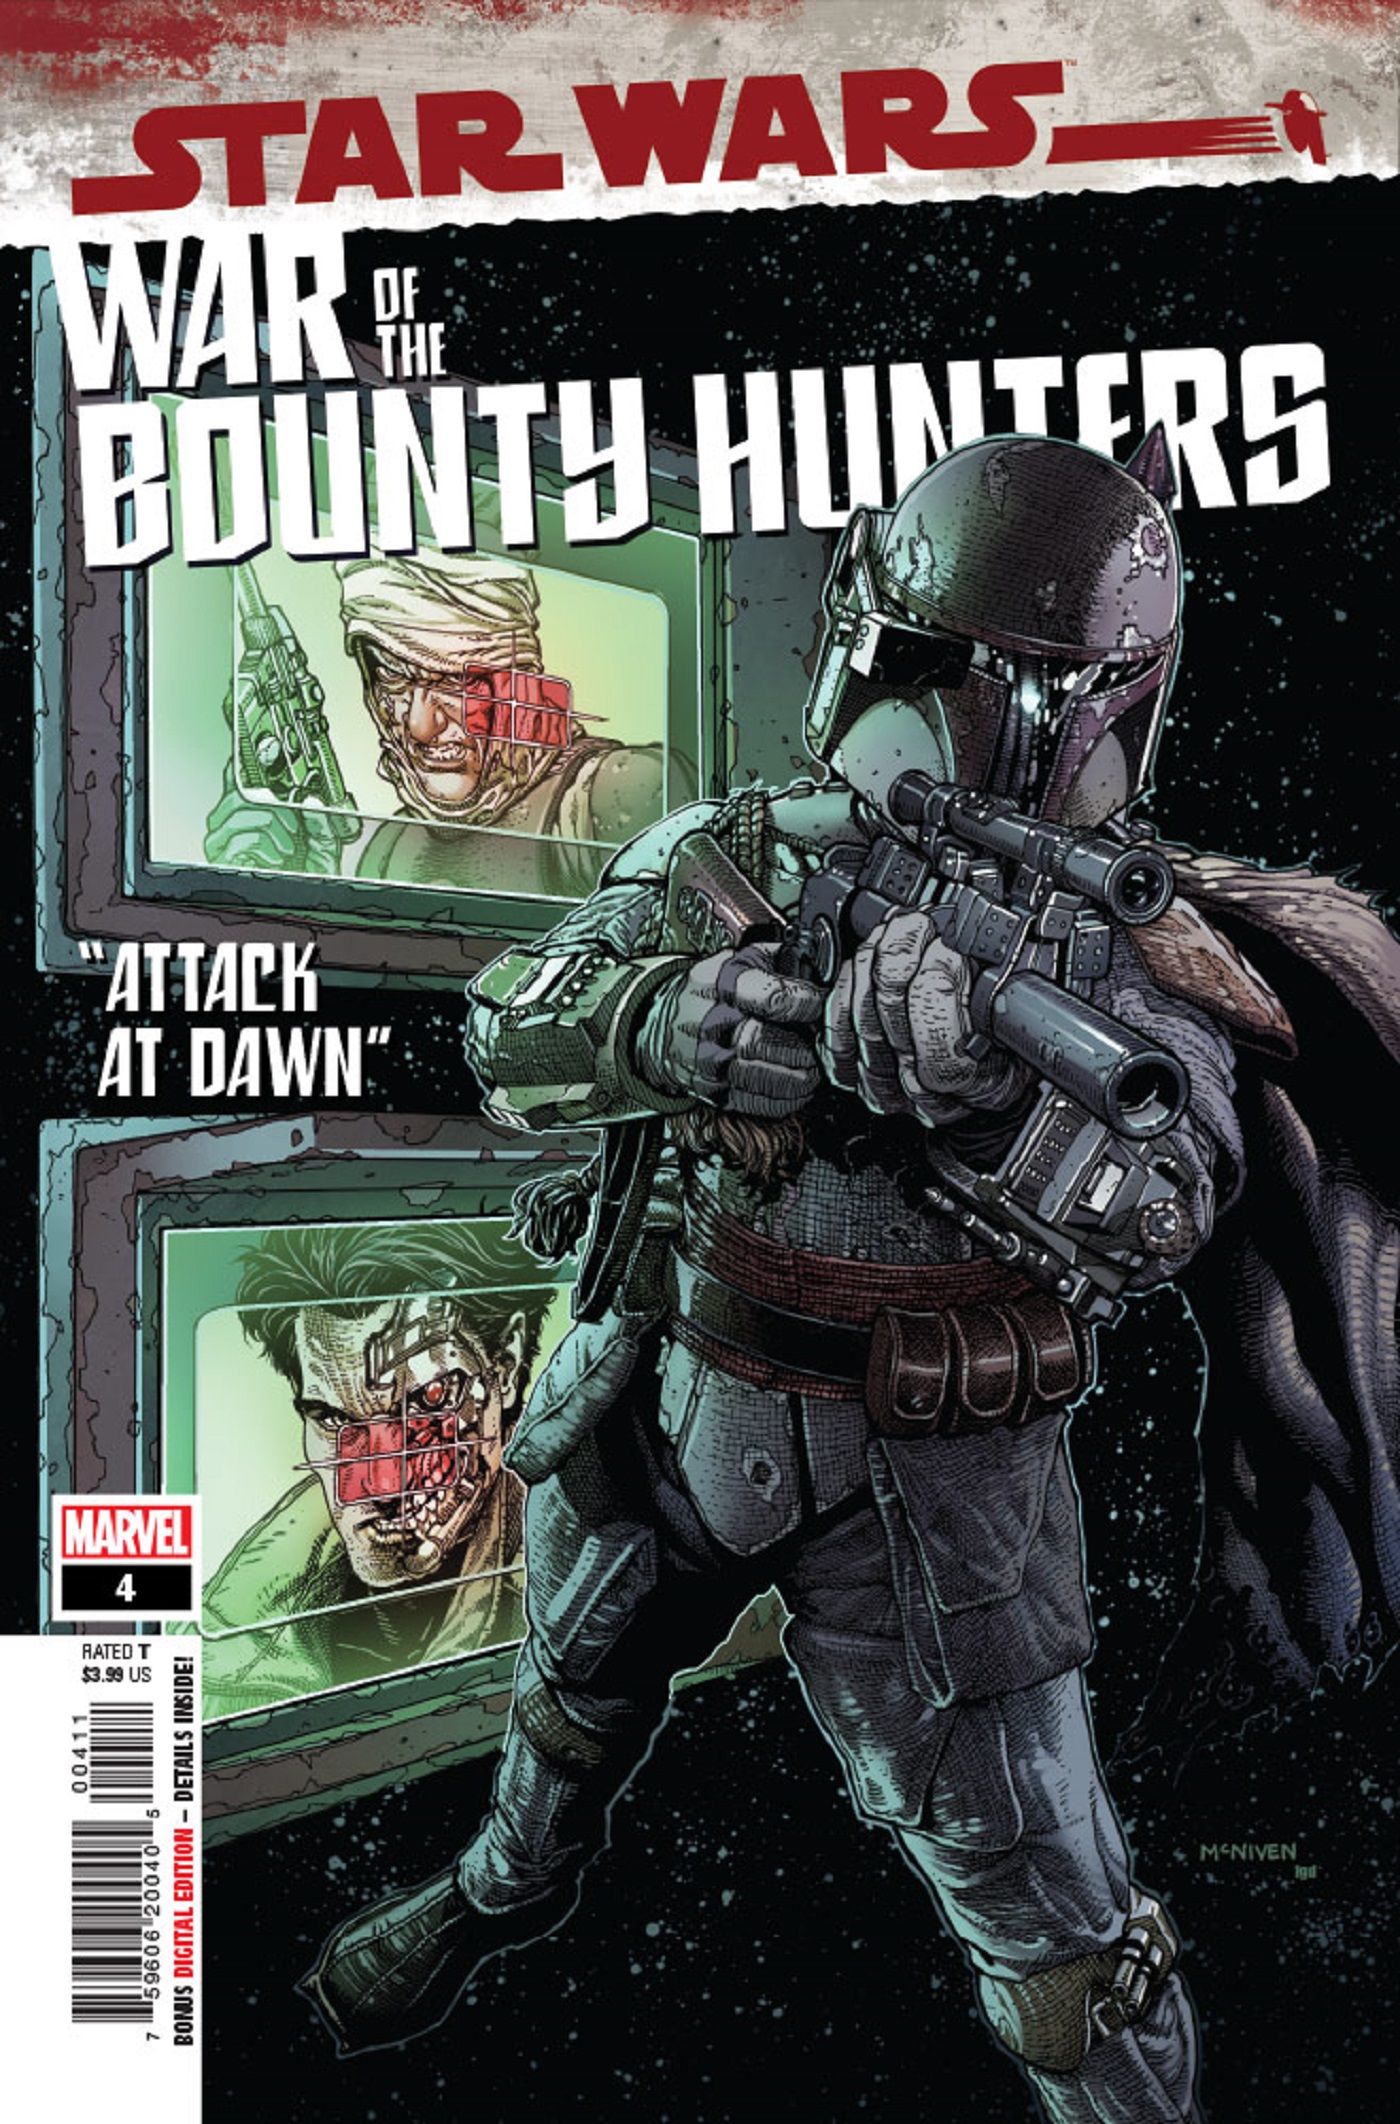 Star Wars War of the Bounty Hunters #4 Cover